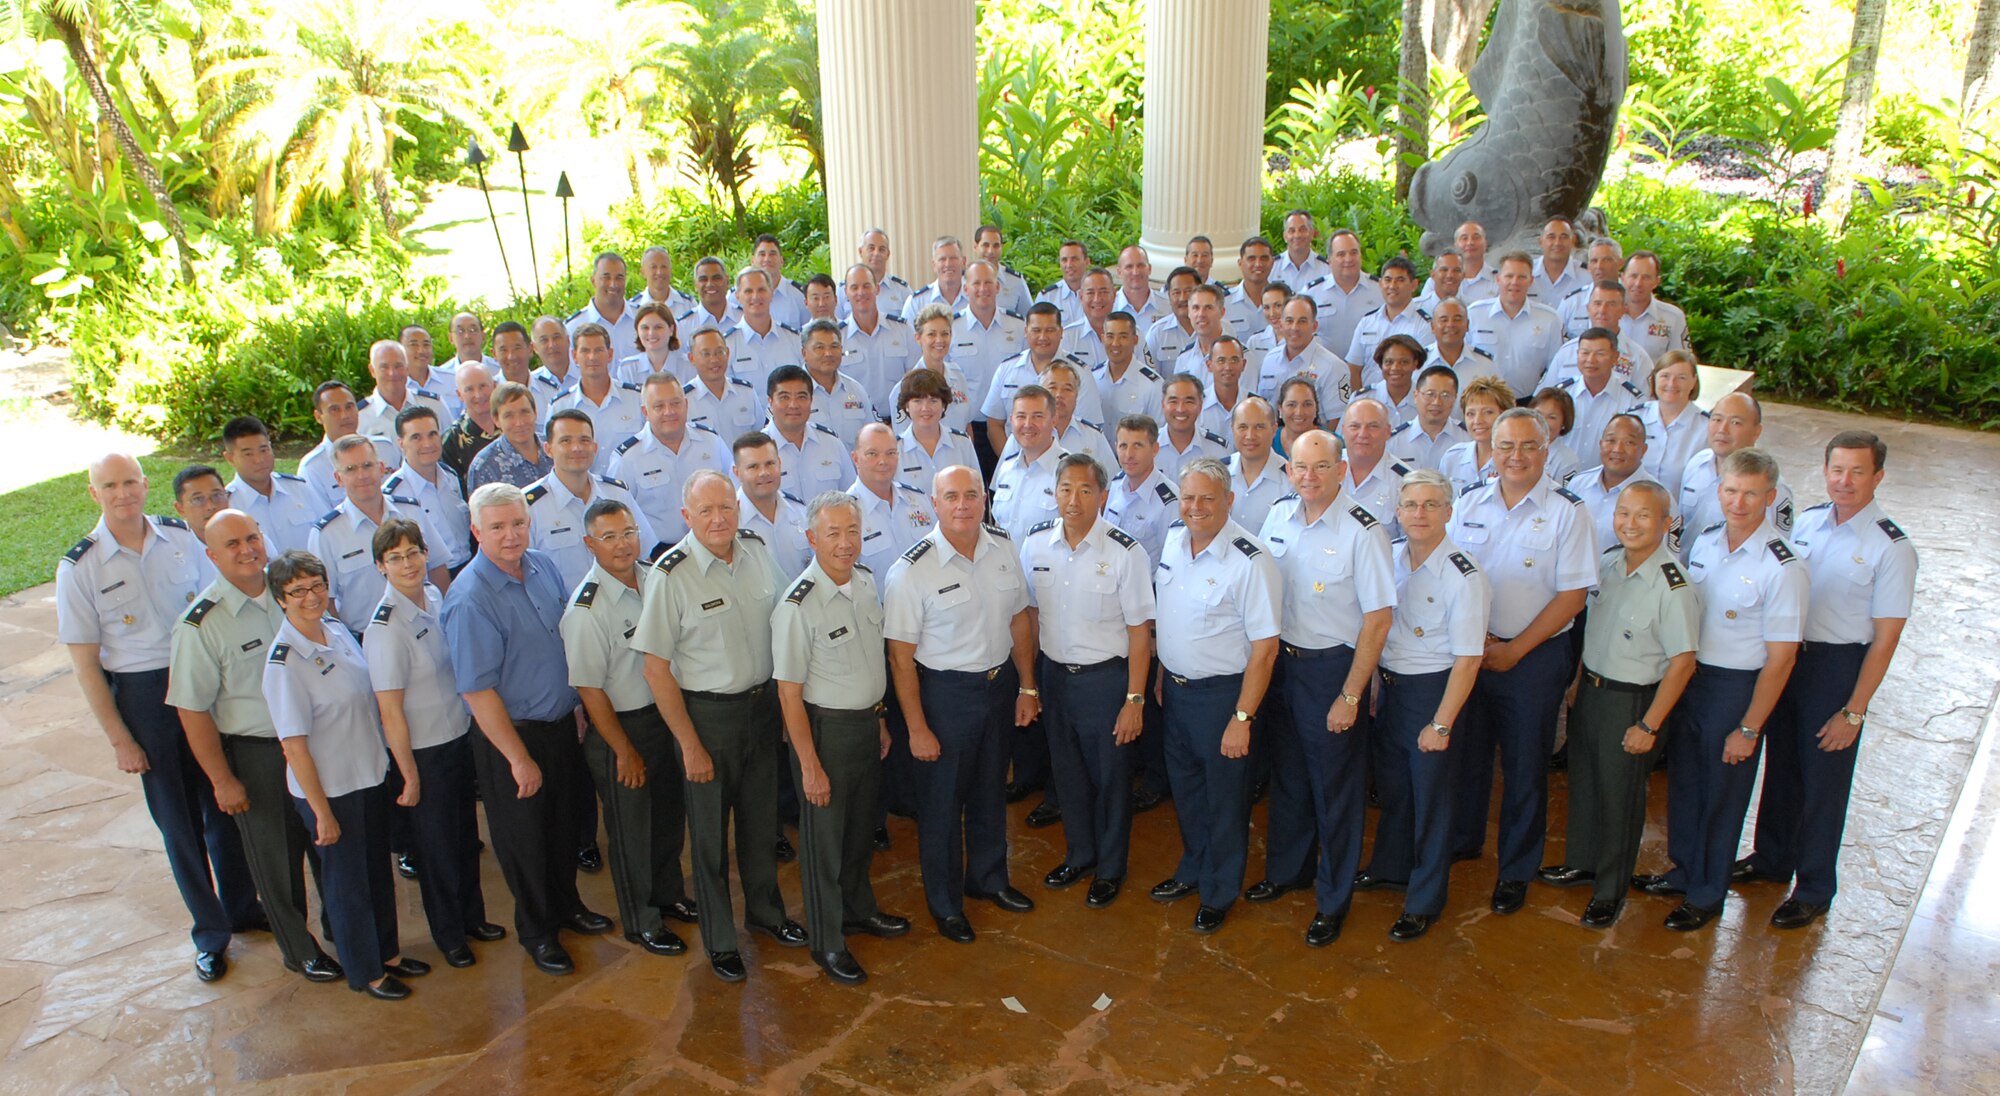 Attendees of the 31st annual HIANG Commander Conference held in Lihue, Kauai.